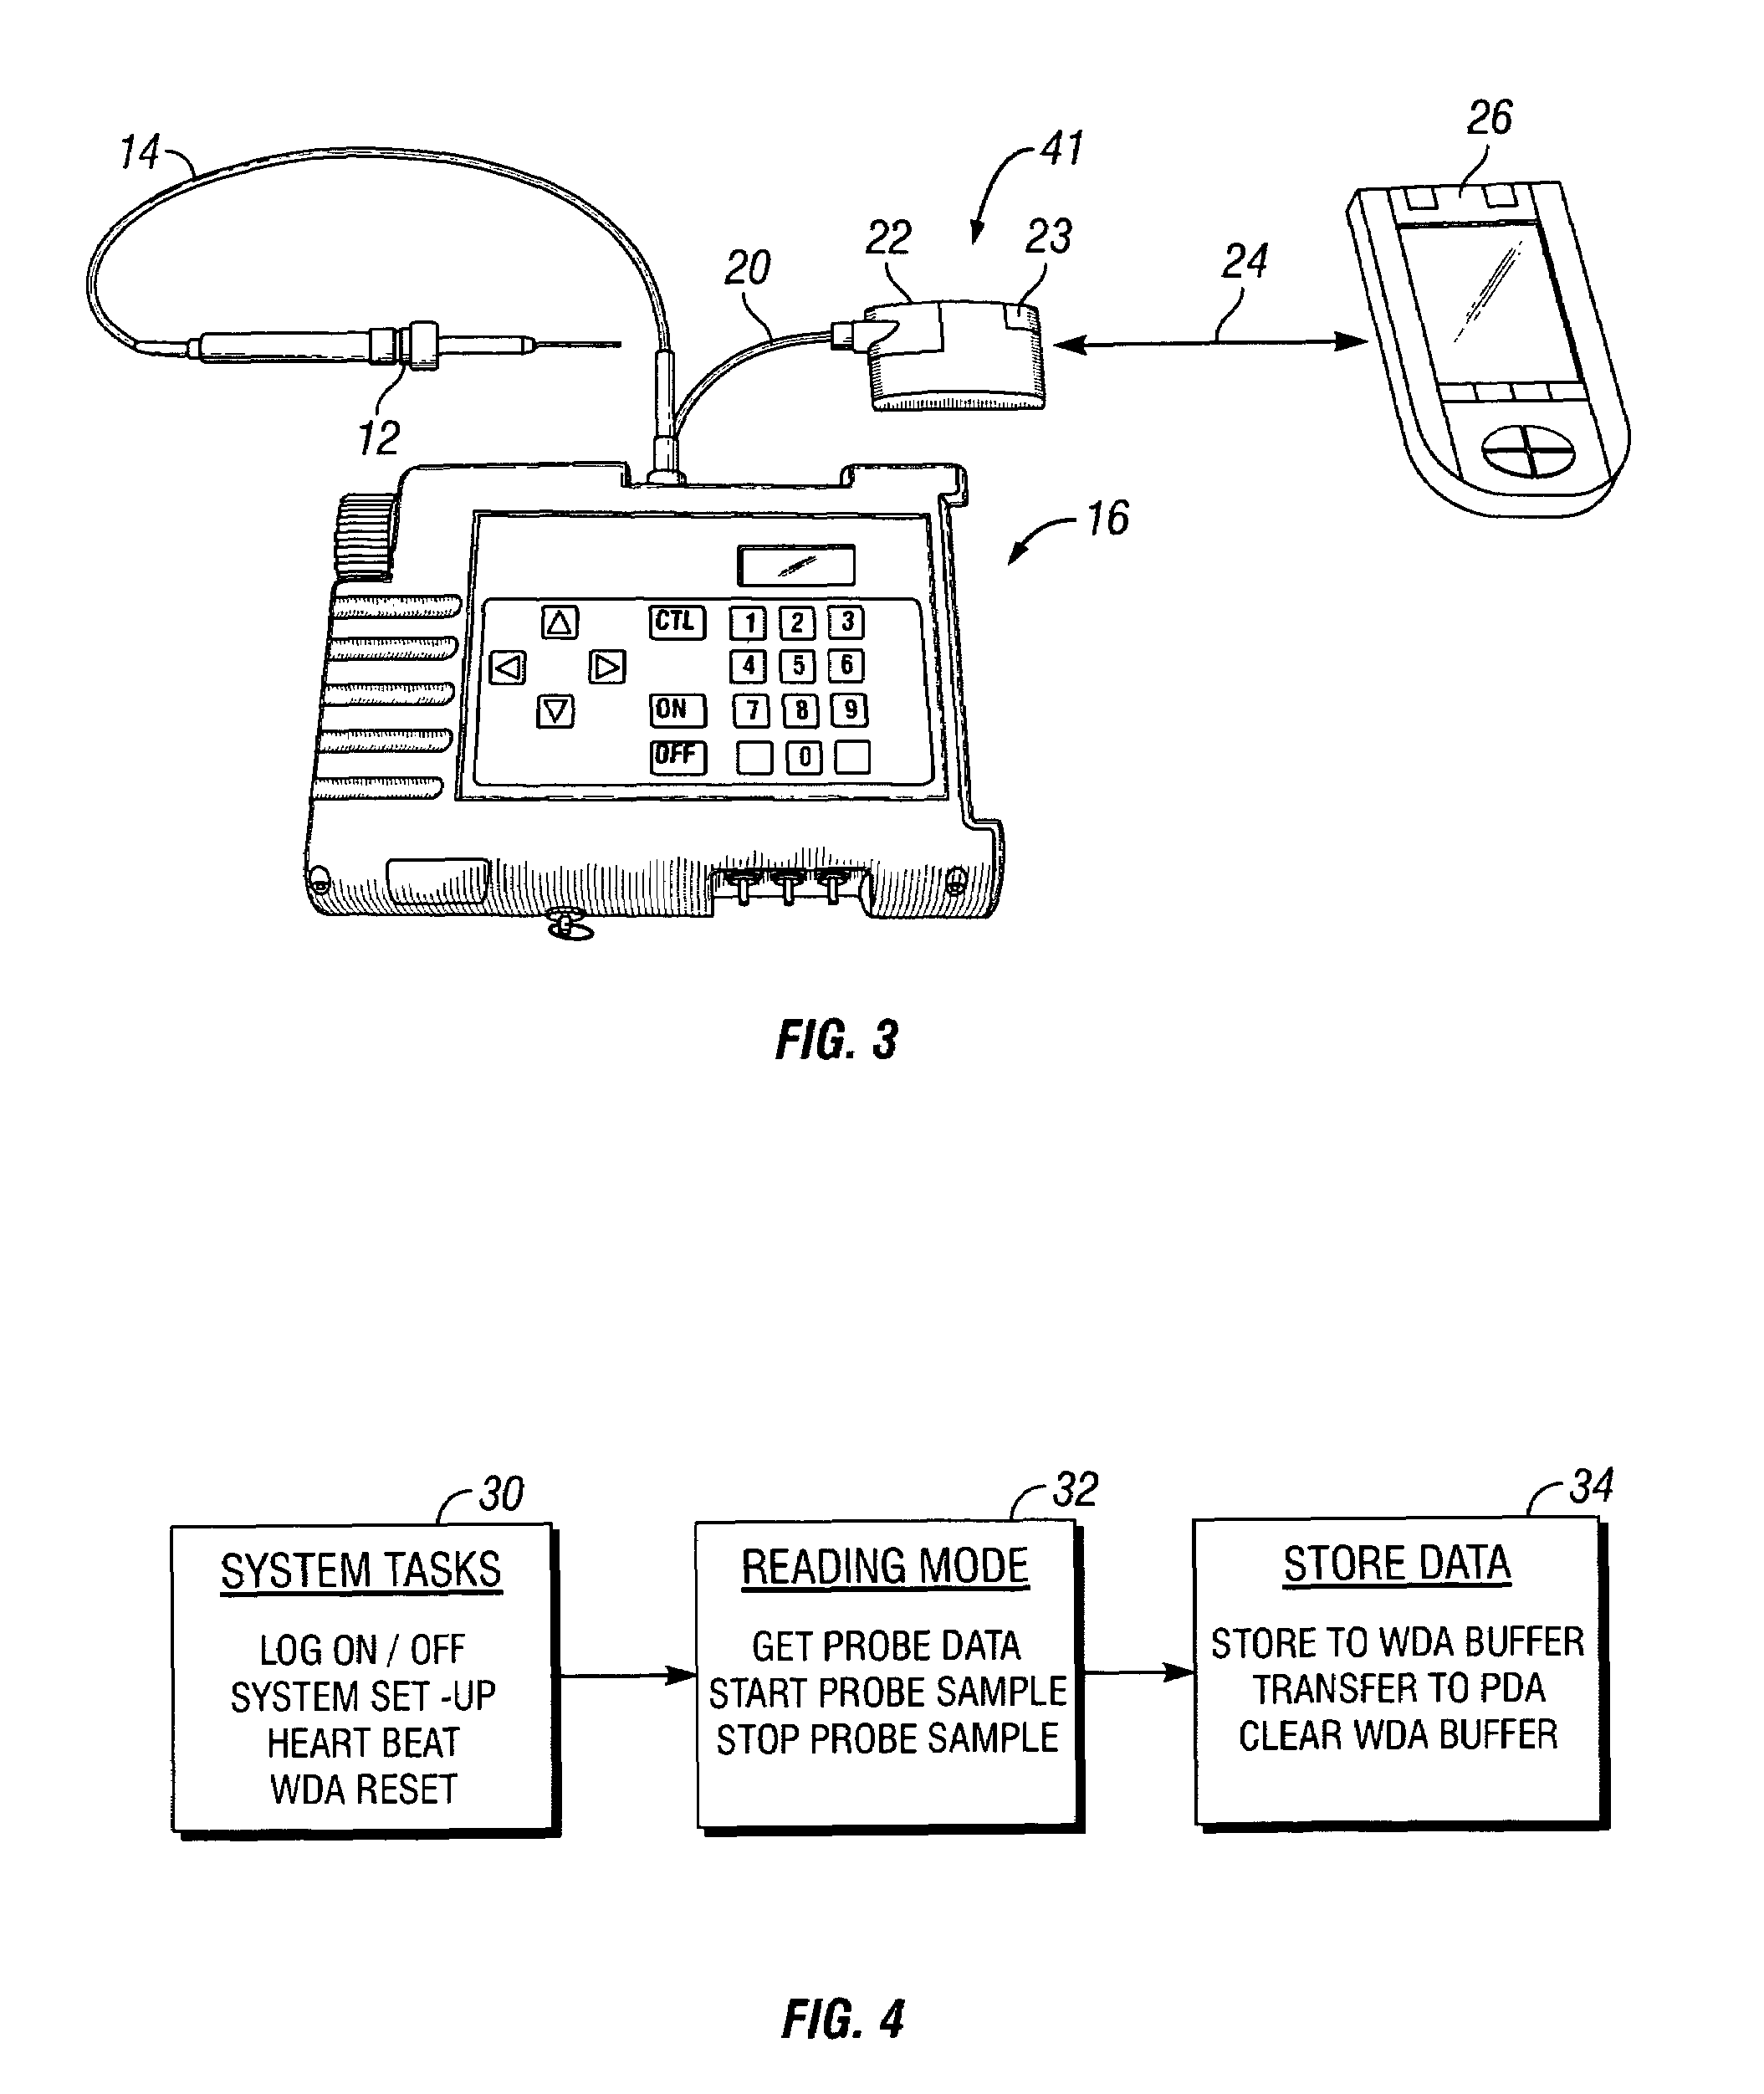 Apparatus and method for storing and transporting data related to vapor emissions and measurements thereof